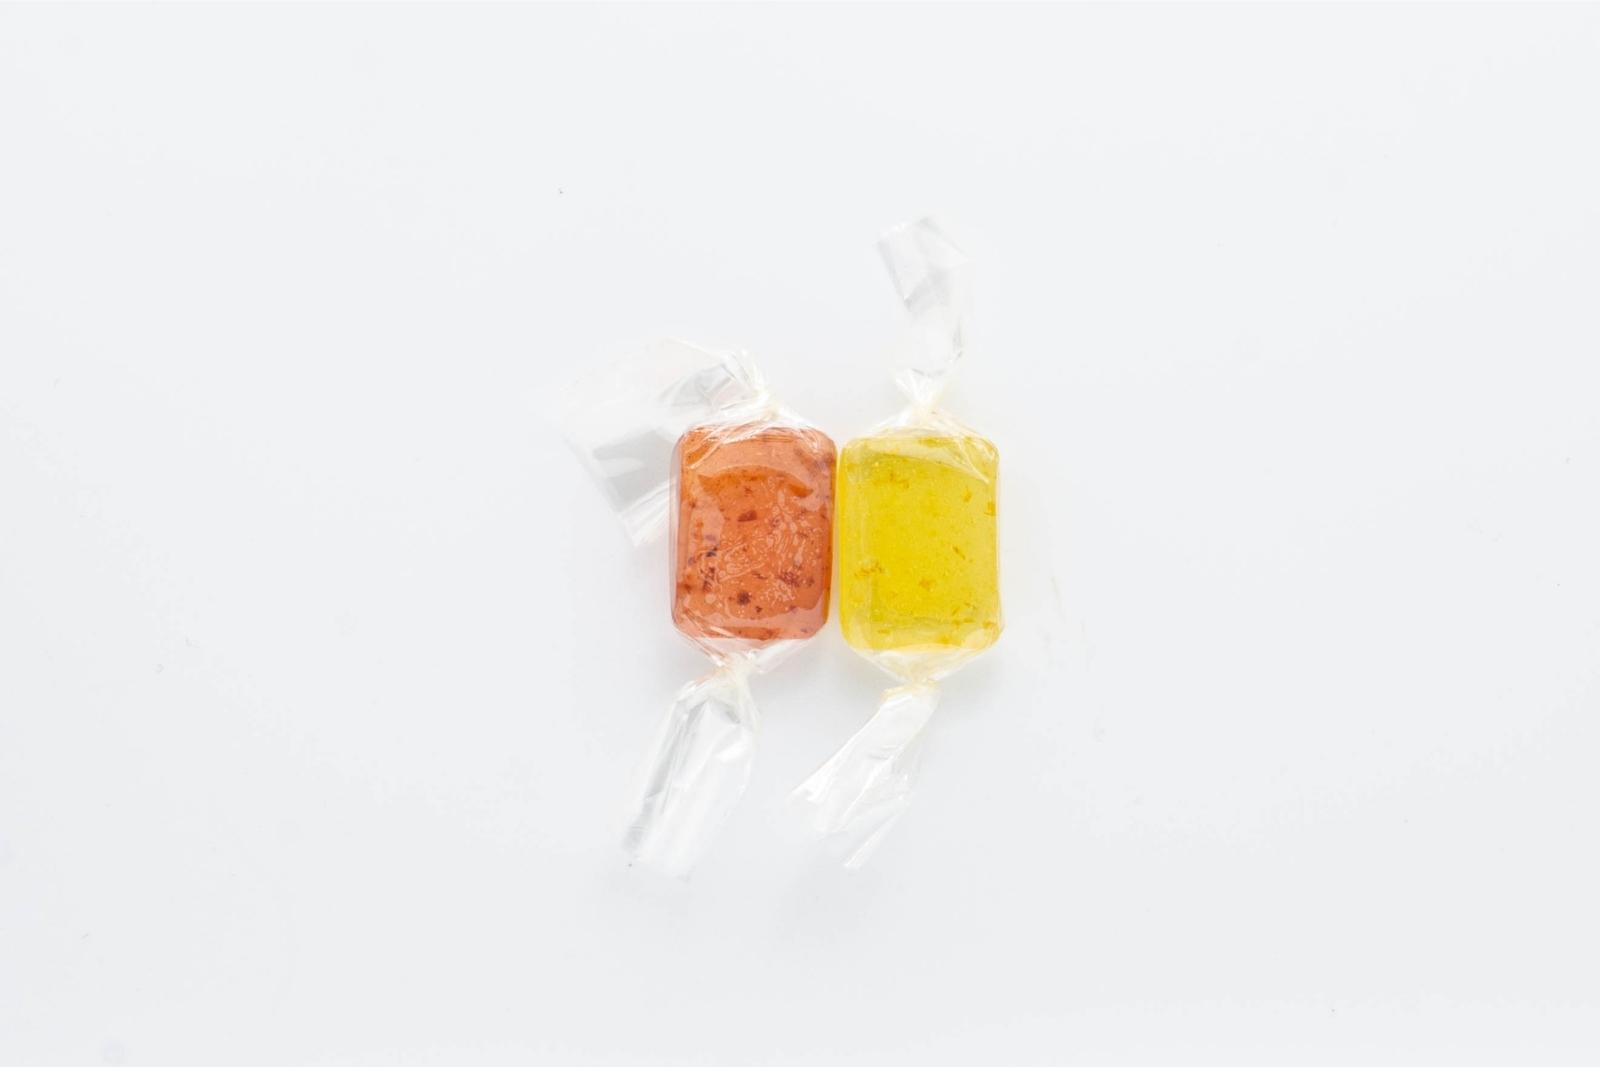 The two varieties of Nice 1:1 hard candies, tart cherry and lemon, on a white background